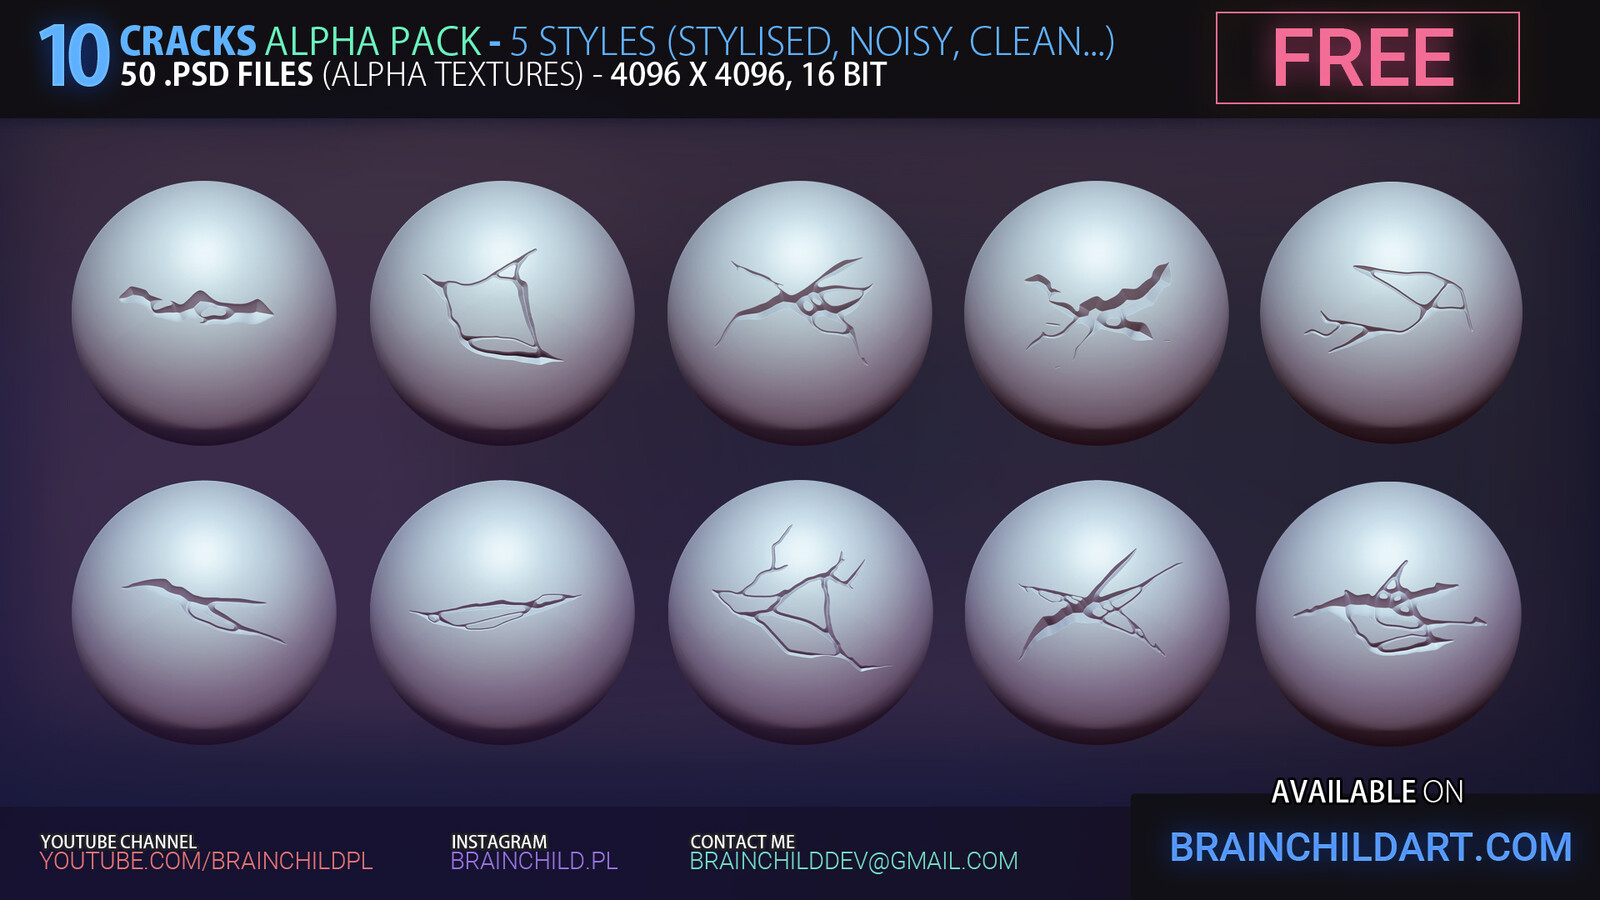 GRAB IT https://www.artstation.com/a/578230 |  [FREE] 10 Cracks ALPHA PACK (+Video How to install) - 50 .PSD files | 5 styles (Clean, Stylised Damage, Noisy Damage...) | Zbrush, Blender &amp; Substance! Damage, Cracks Stylised Alpha Textures